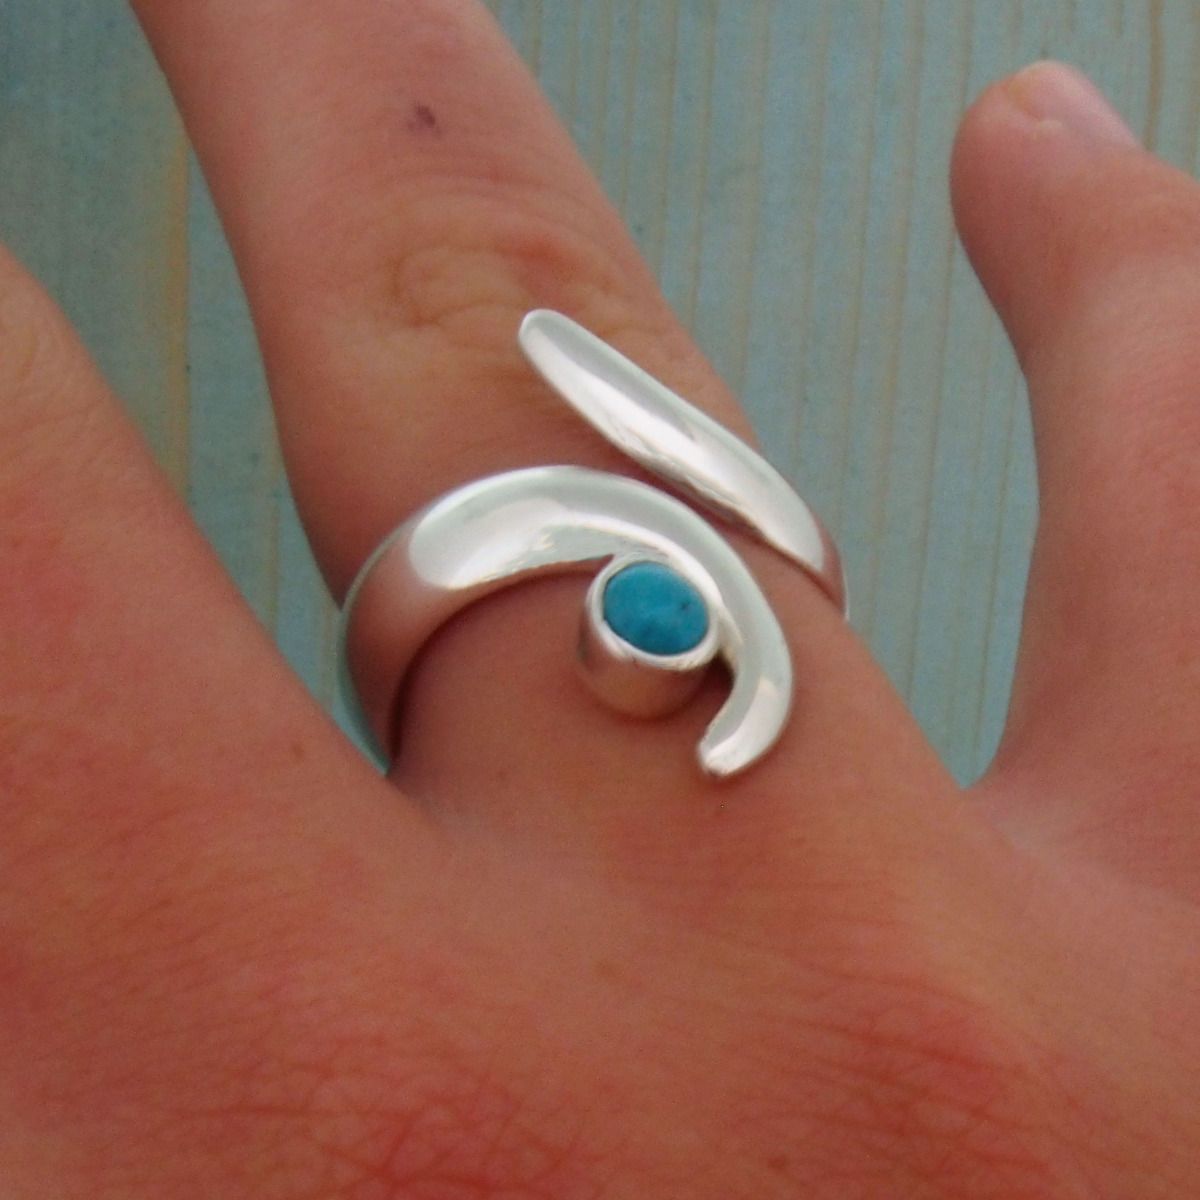 Cuernita Turquoise and Silver Ring - Silver Bubble